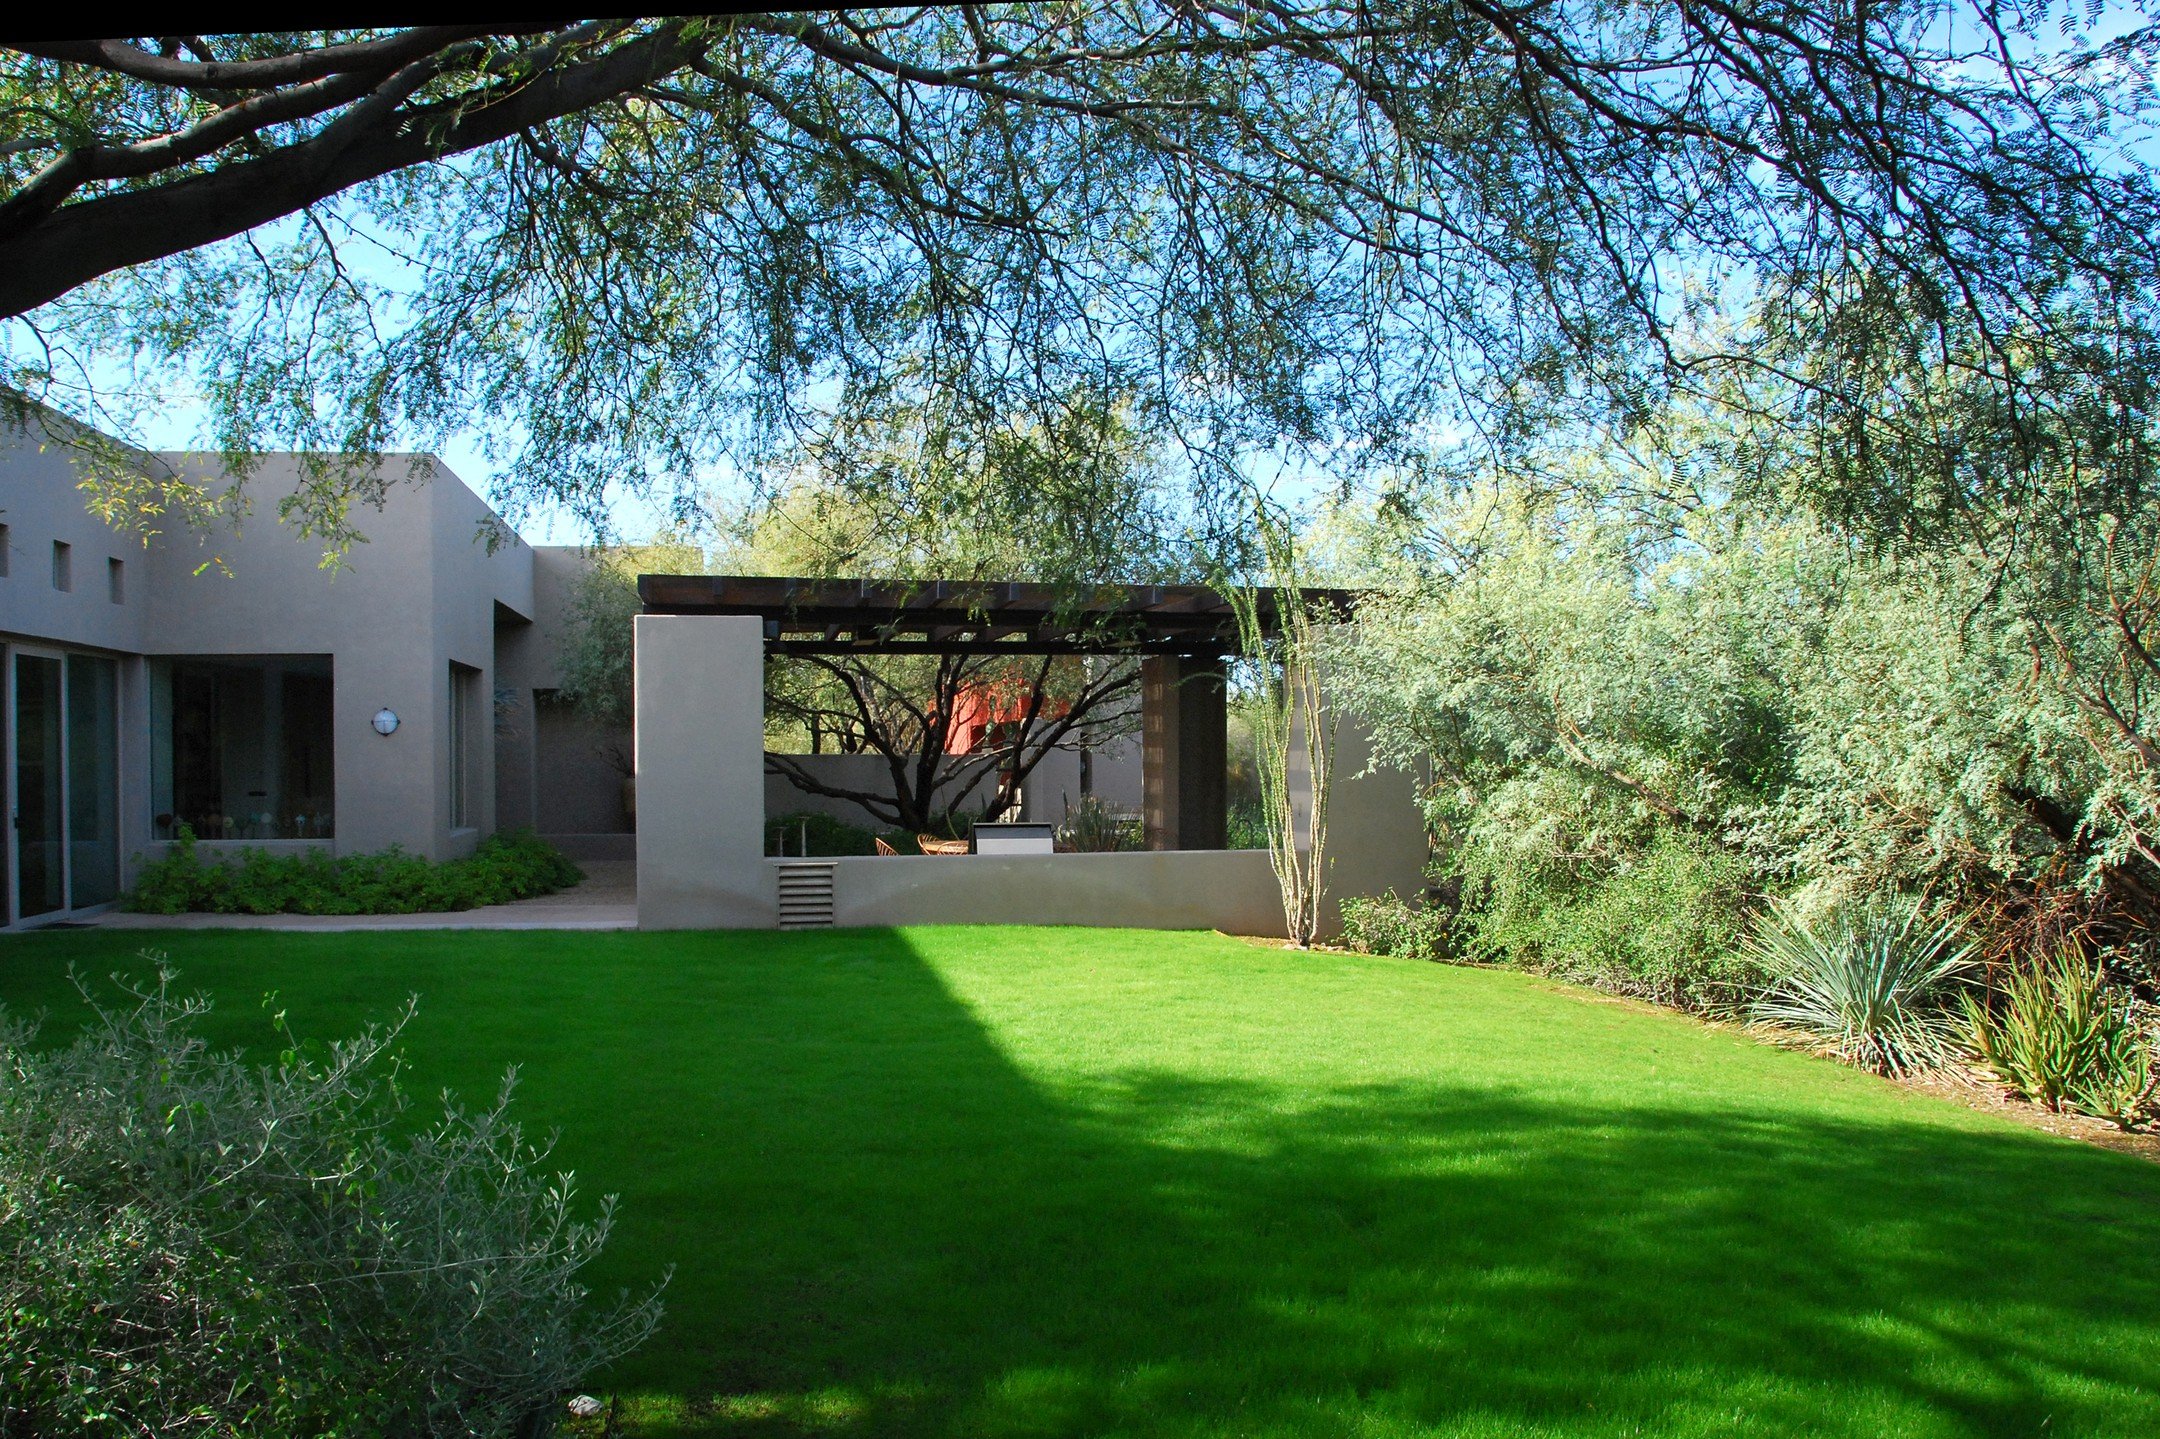 Building a fake wash, Paradise Valley, Arizona
The grand-kids had grown, and the unused lawn was removed, the size of the left-over bare space was out of scale with the dense desert landscape and was problematic as what to do with the area. The solut